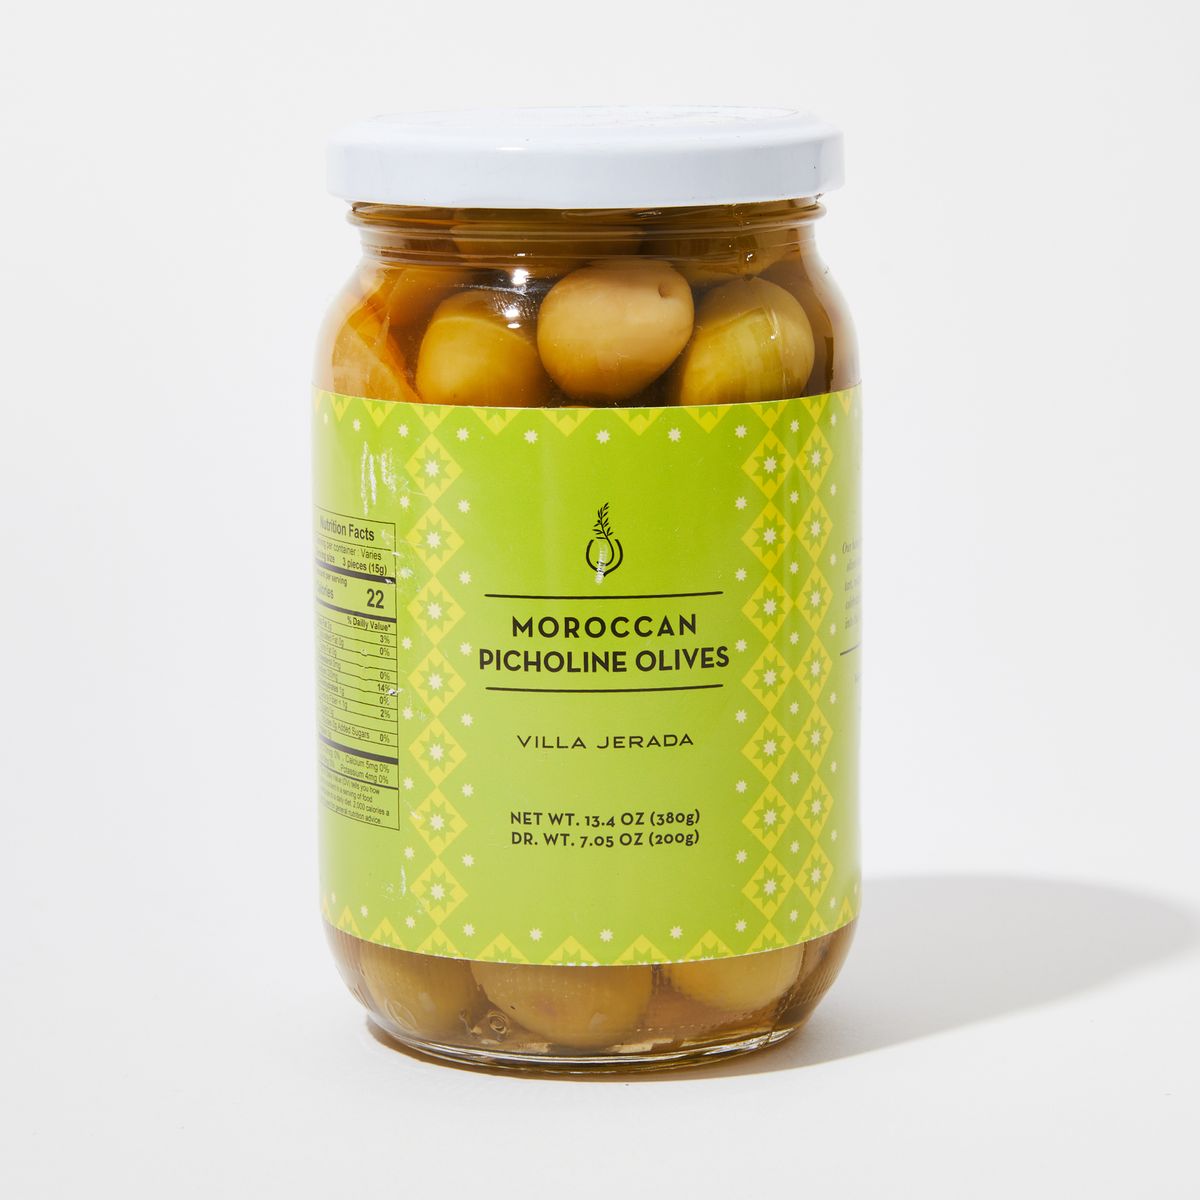 Clear jar of olives in liquid with green label with the name "Moroccan Picholine Olives"